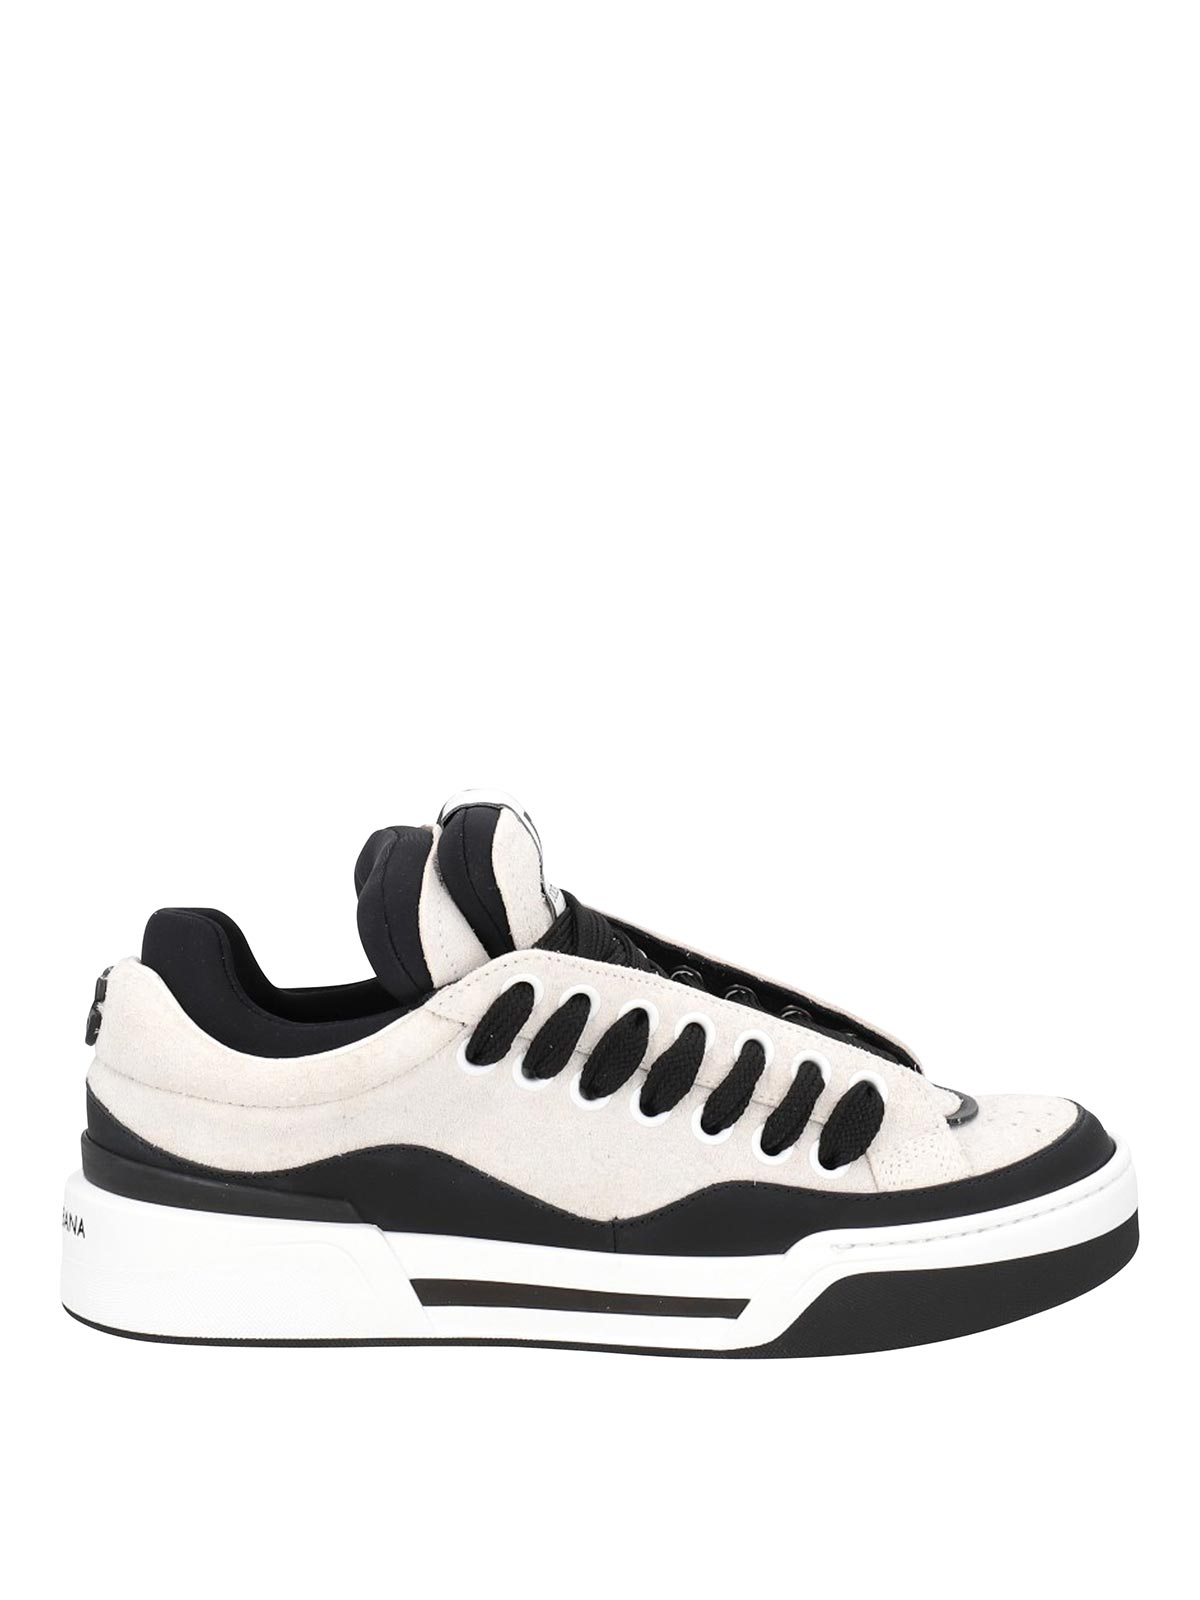 Dolce & Gabbana New Roma Sneakers In White